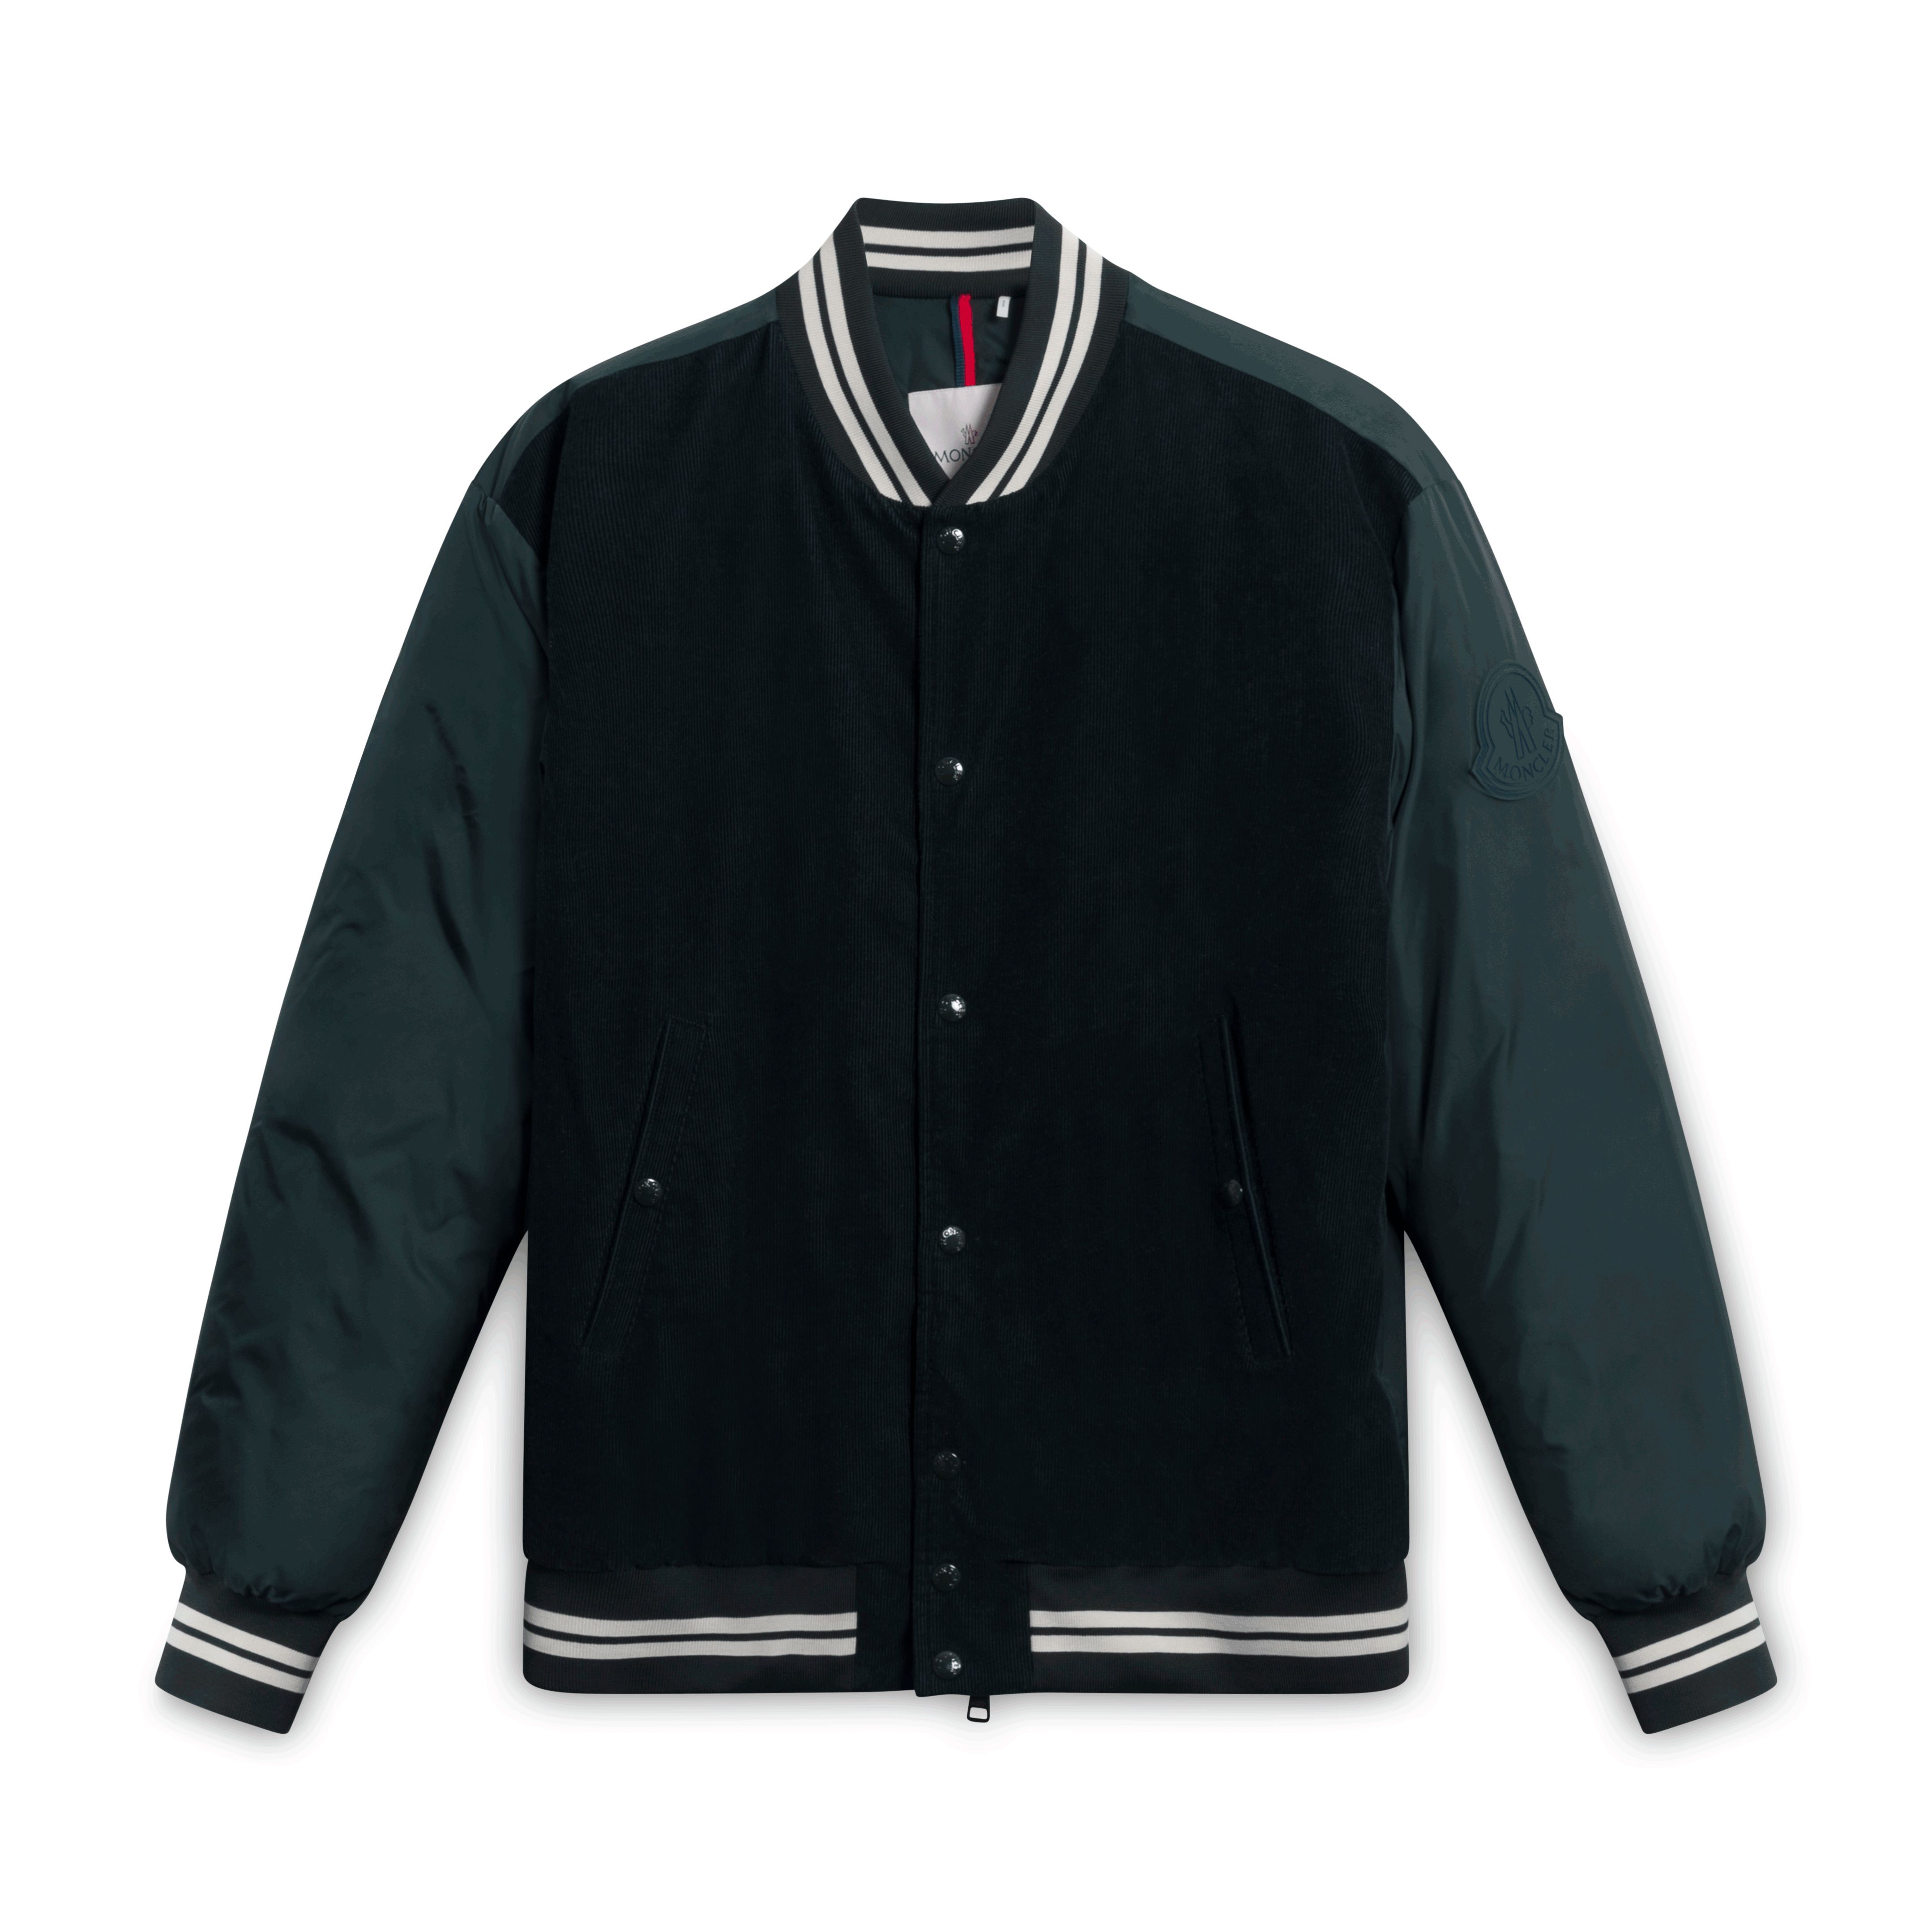 Moncler Varsity Jacket by Cully Smoller | Basic.Space